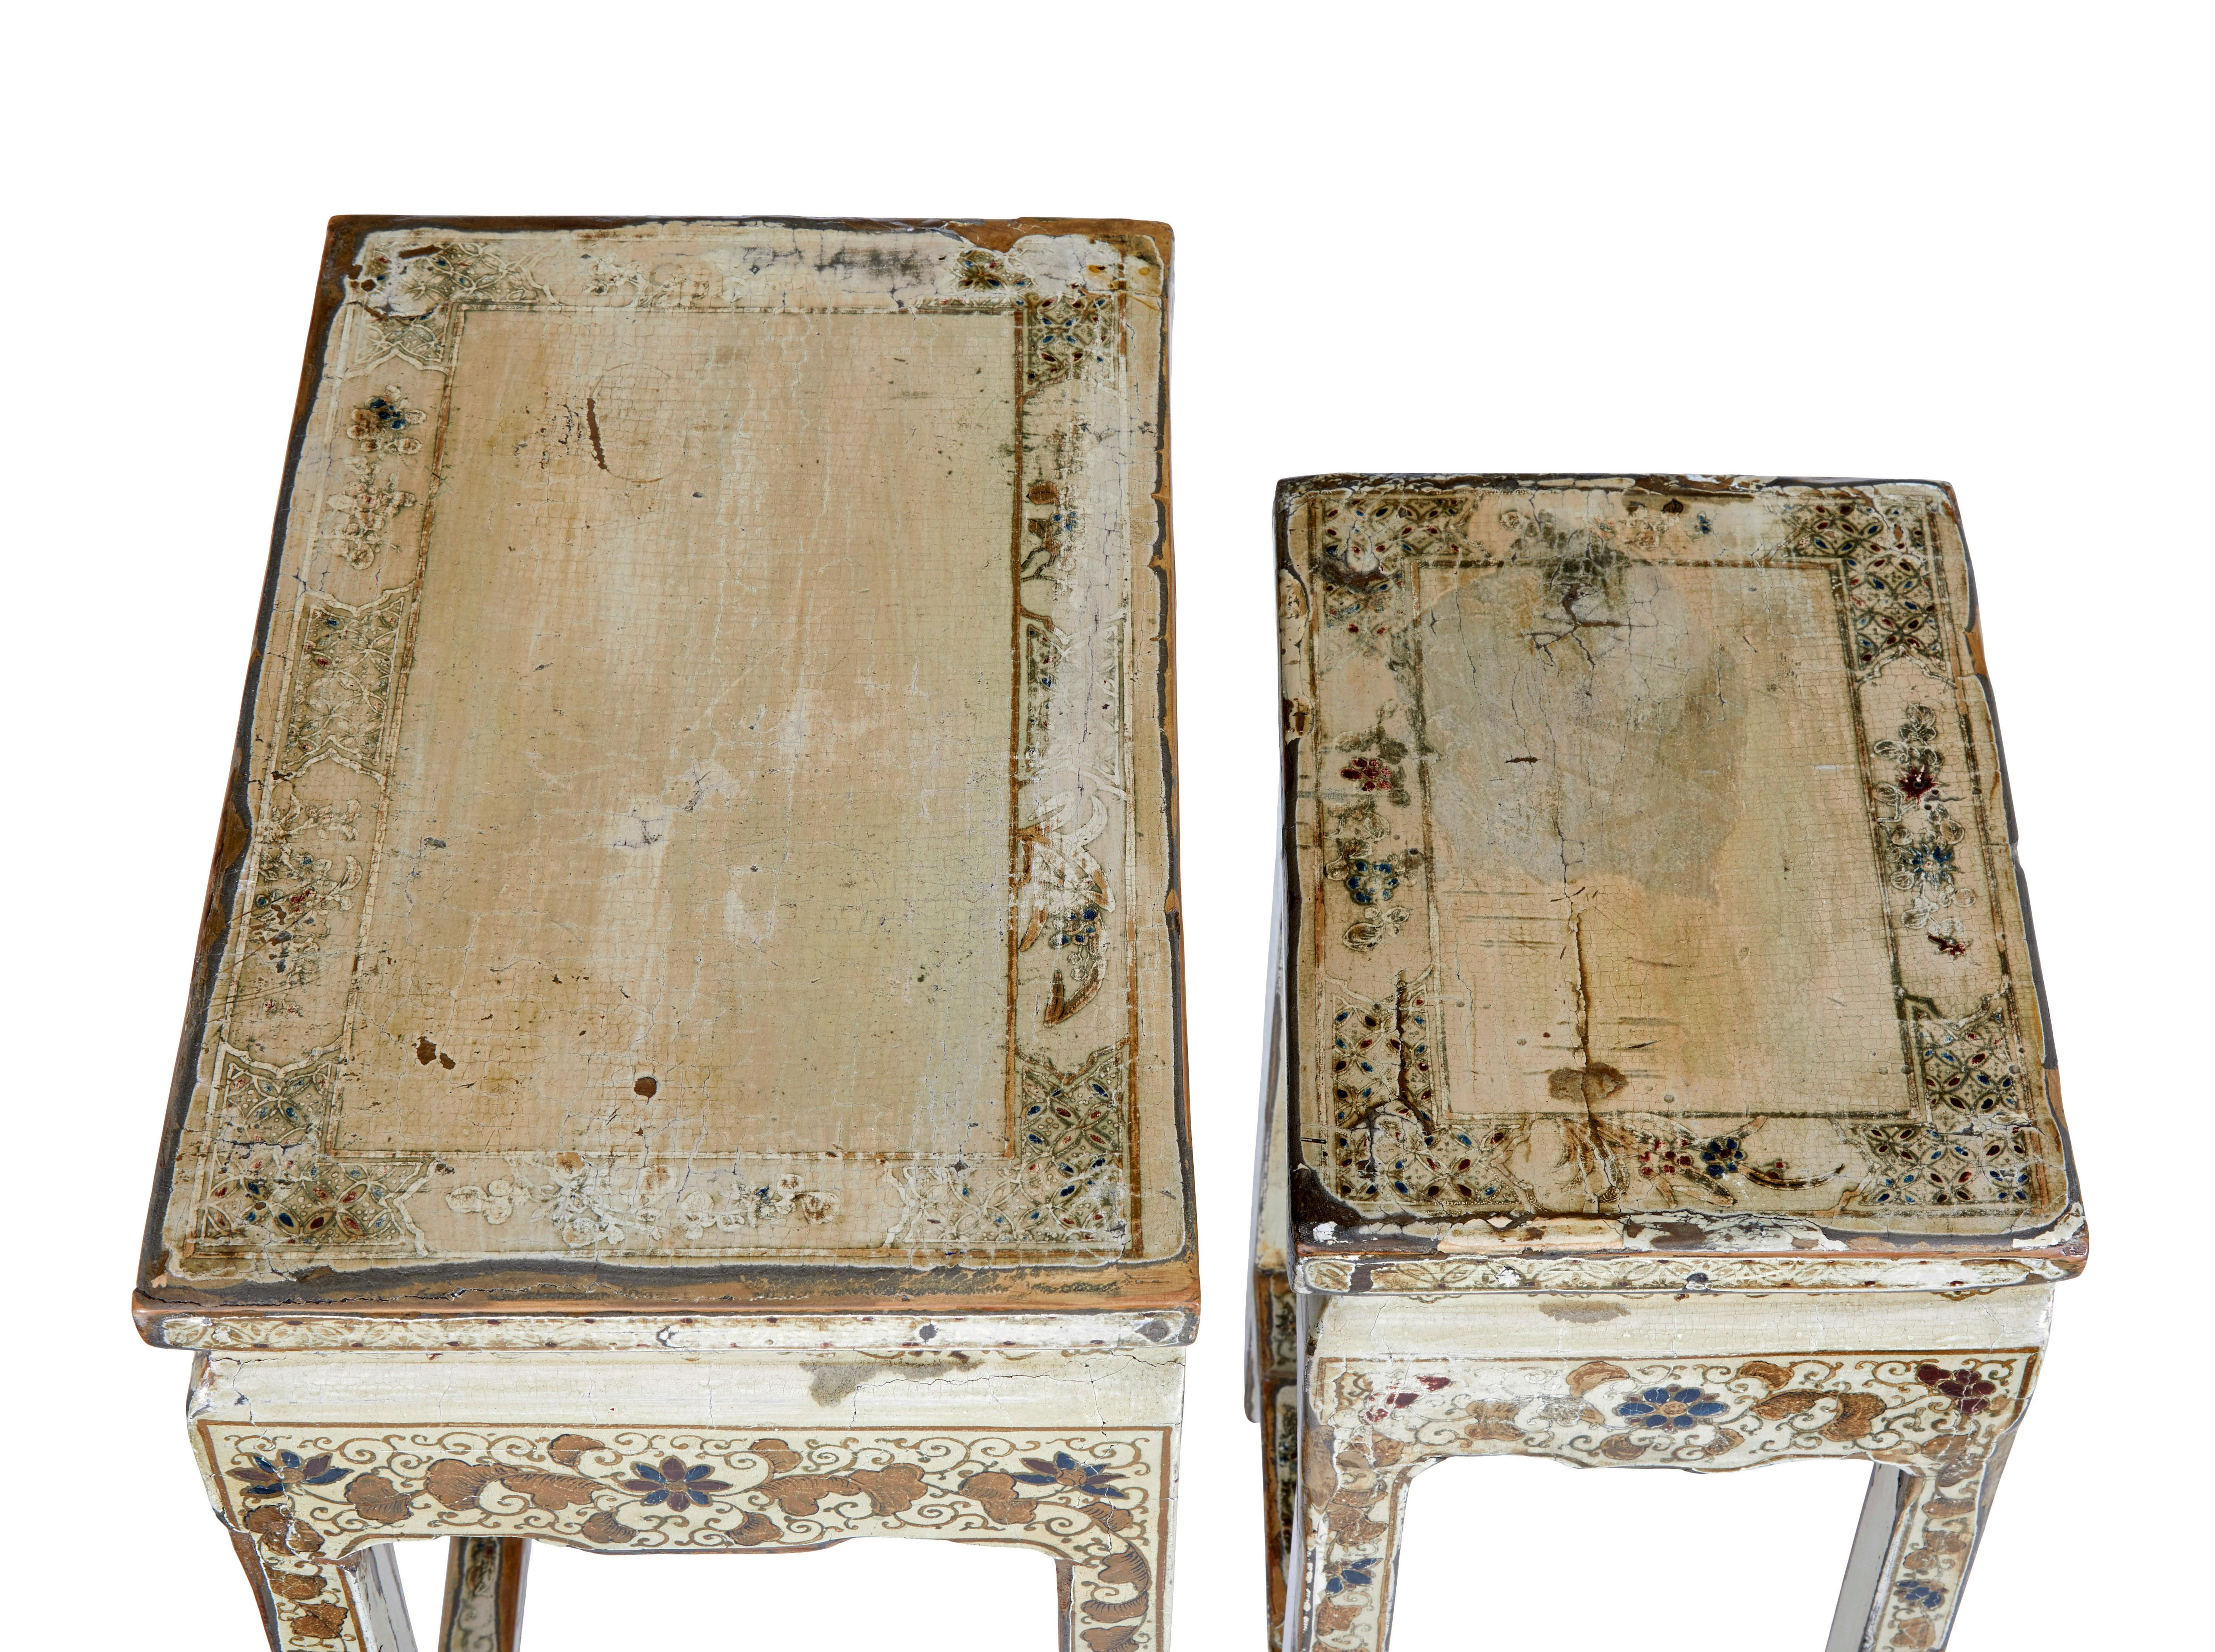 Hardwood Early 20th century nest of 4 lacquered and decorated tables For Sale